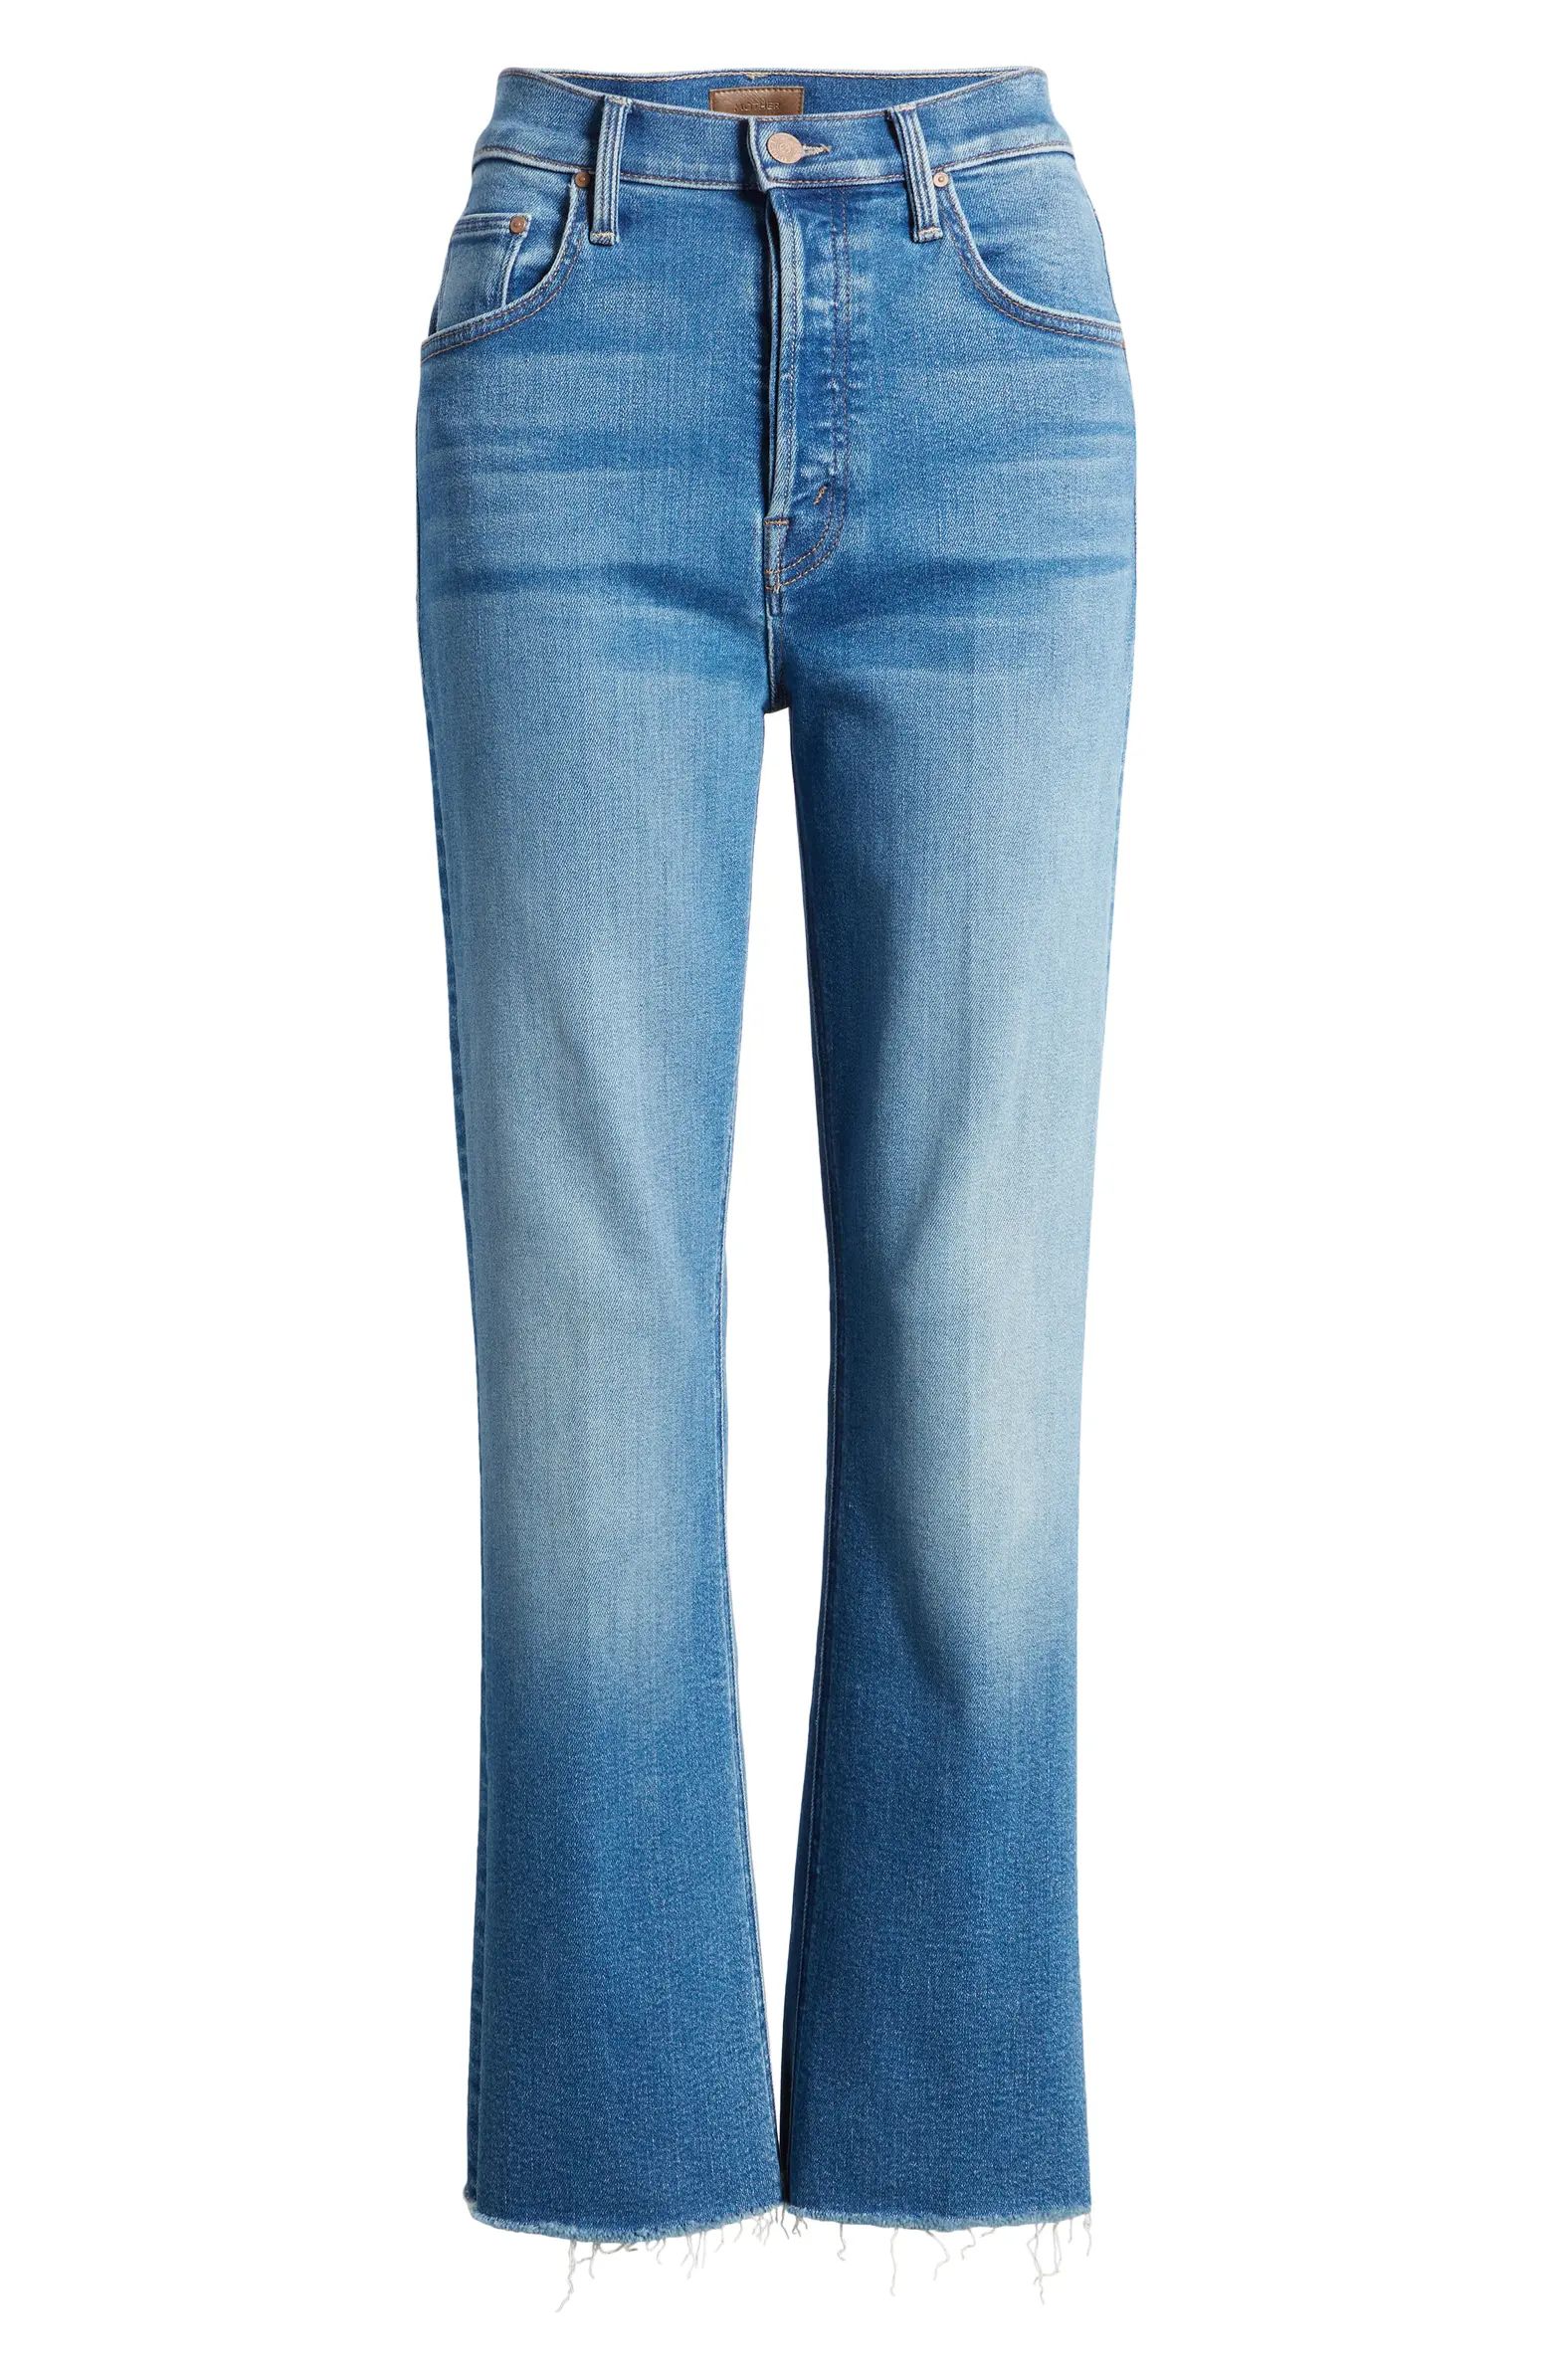 The Tripper Frayed High Waist Ankle Bootcut Jeans | Nordstrom